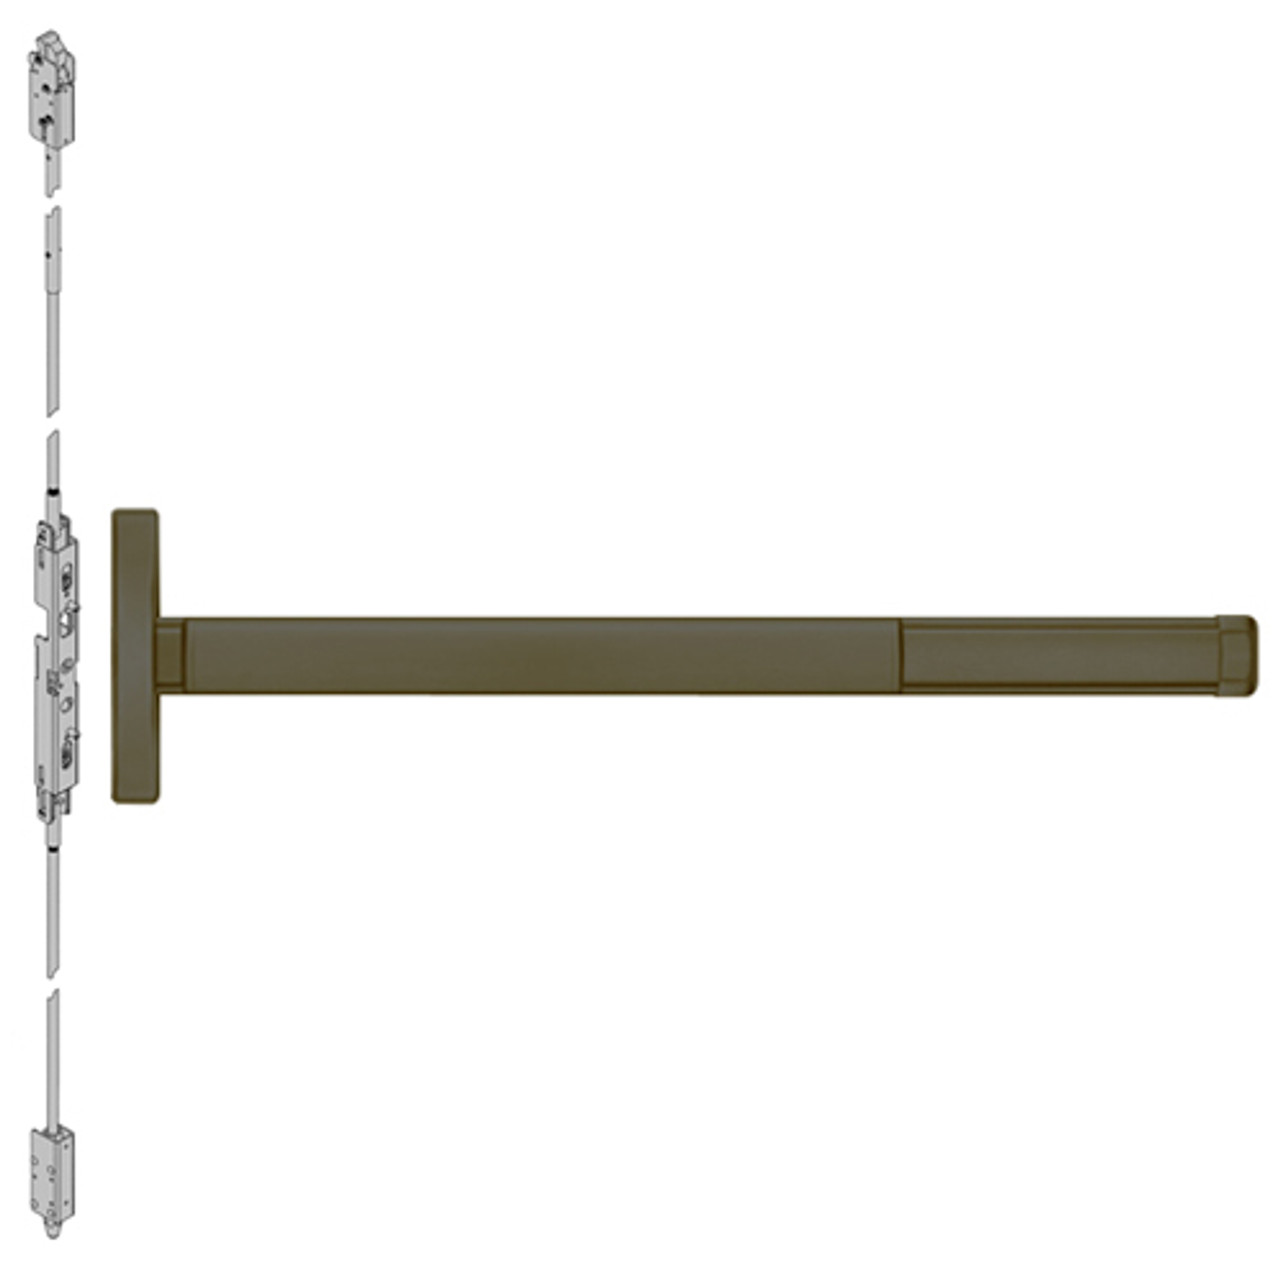 ELRFL2602LBR-613-36 PHI 2600 Series Fire Rated Concealed Vertical Rod Exit Device with Electric Latch Retraction Prepped for Dummy Trim in Oil Rubbed Bronze Finish